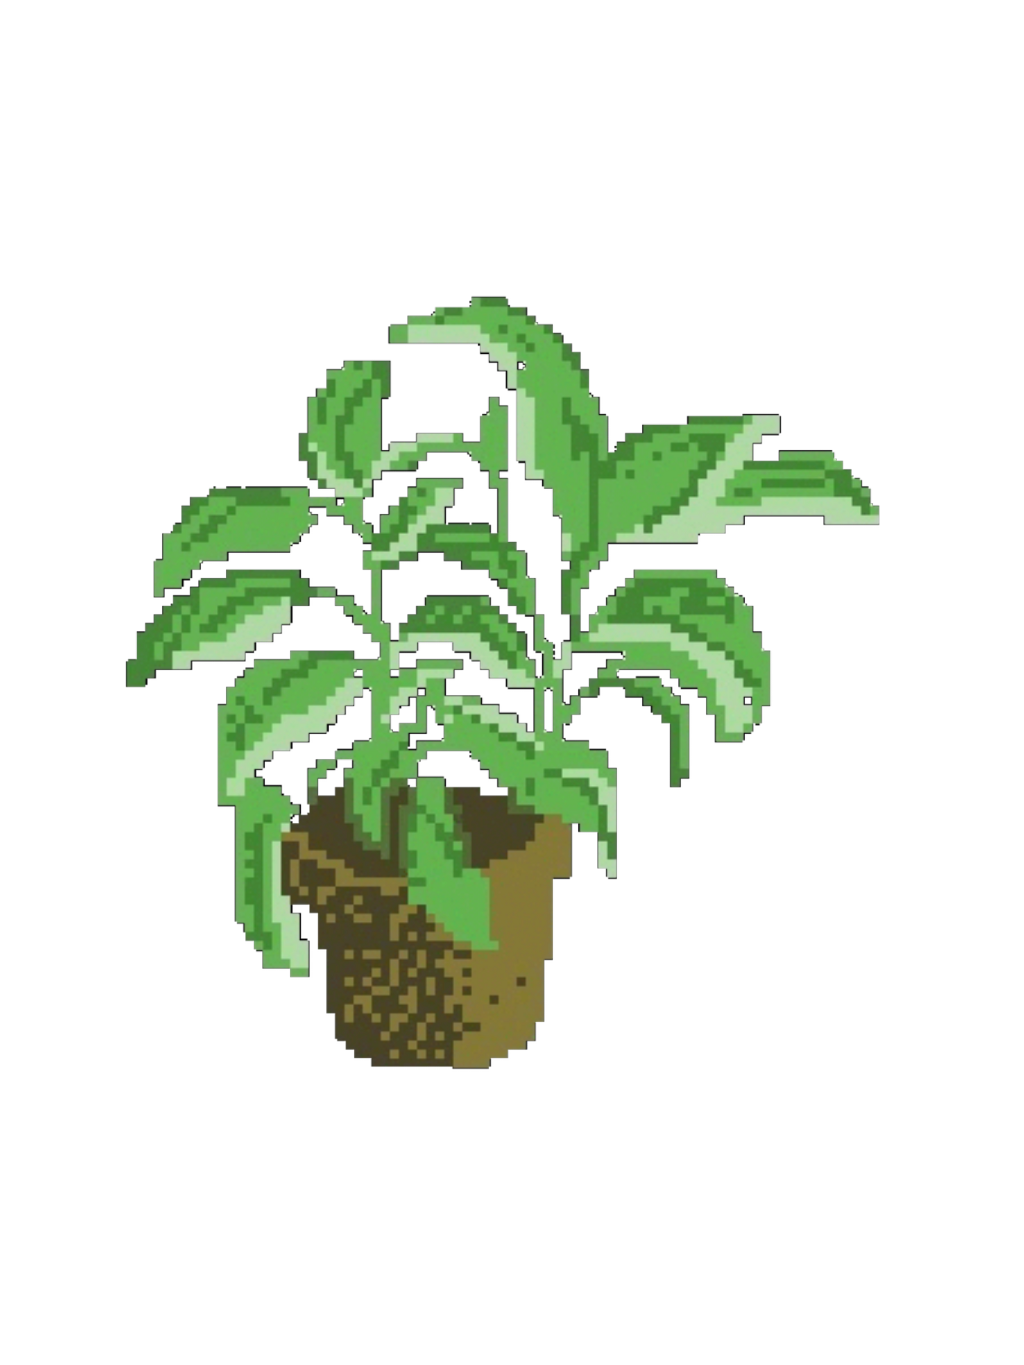 Planting clipart aesthetic.